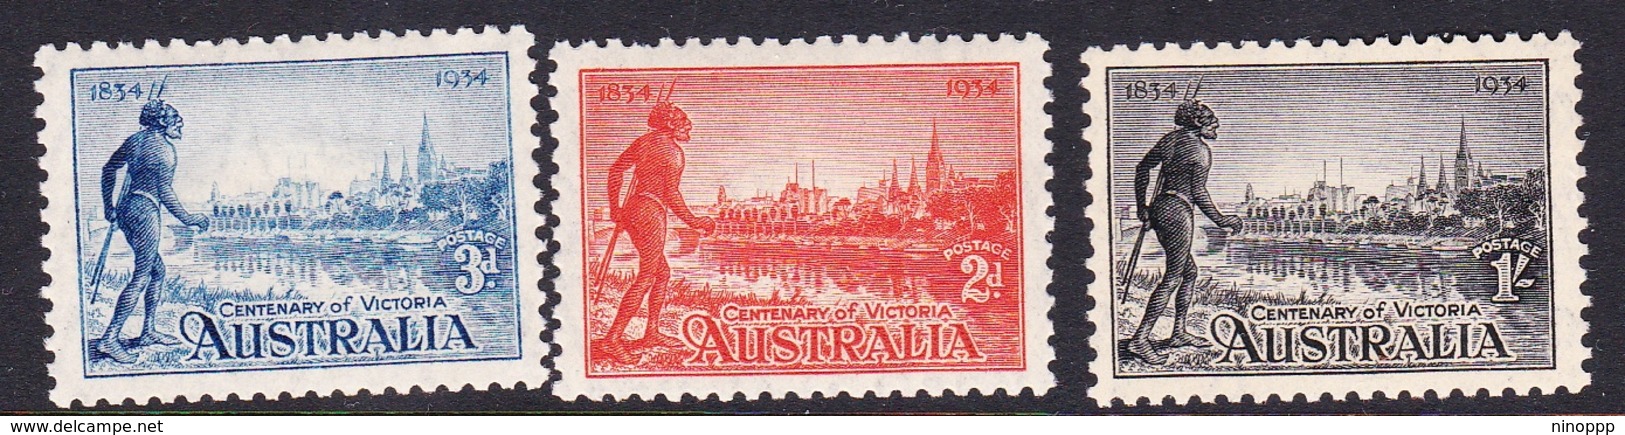 Australia SG 147-149 1934 Centenary Of Victoria Perf 10.5, Mint Never Hinged - Mint Stamps